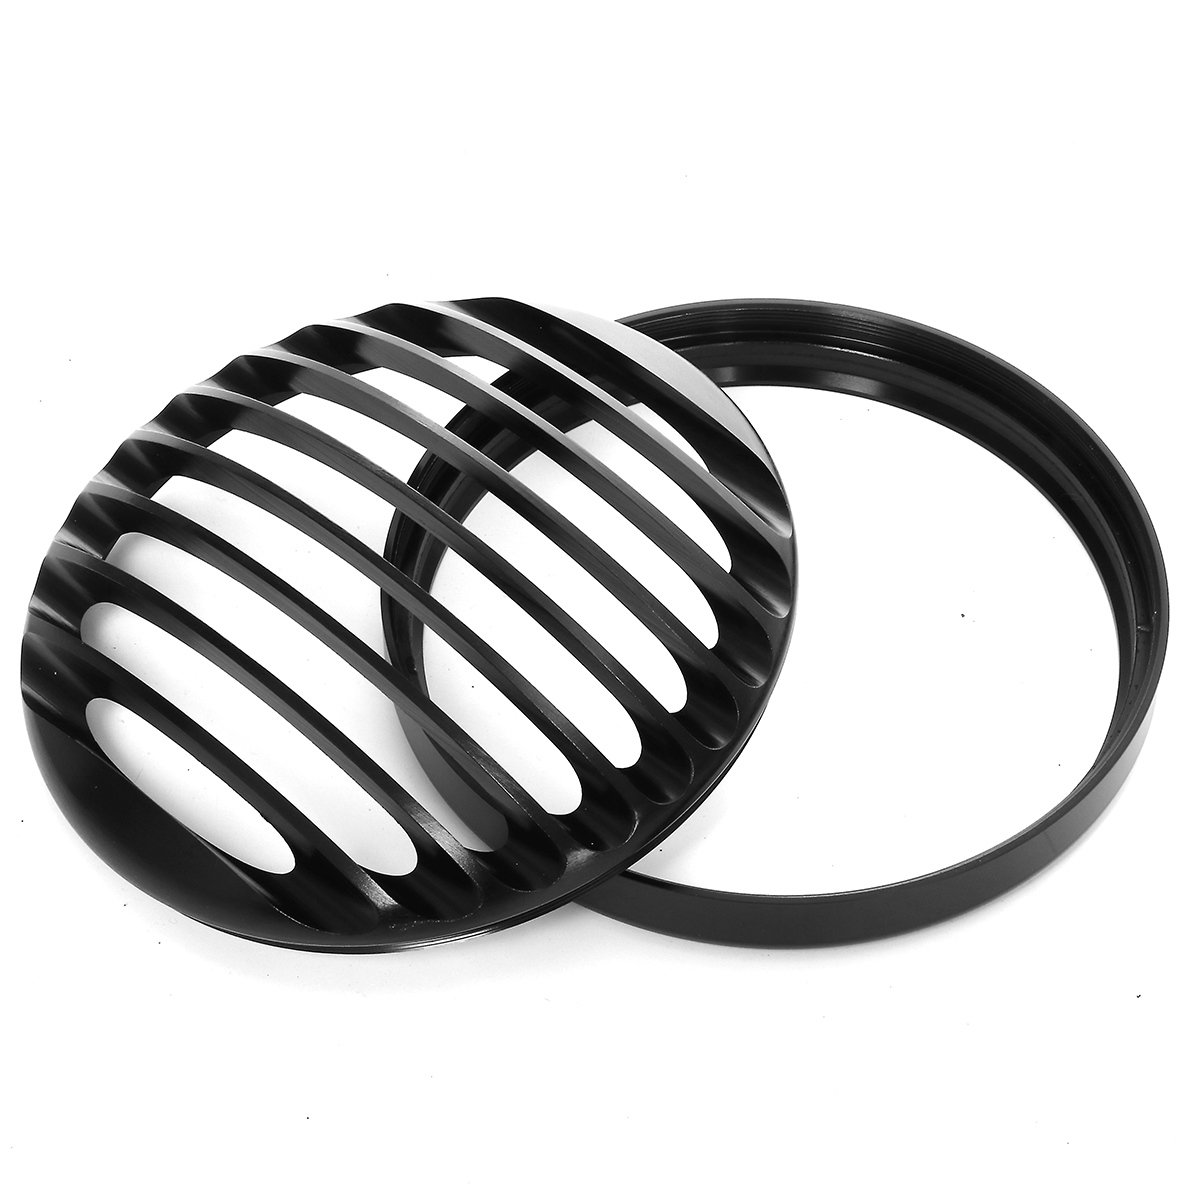 5.75 Inch Headlight Cover Light Grill Guard Black Universal for Cafe Racer Chopper